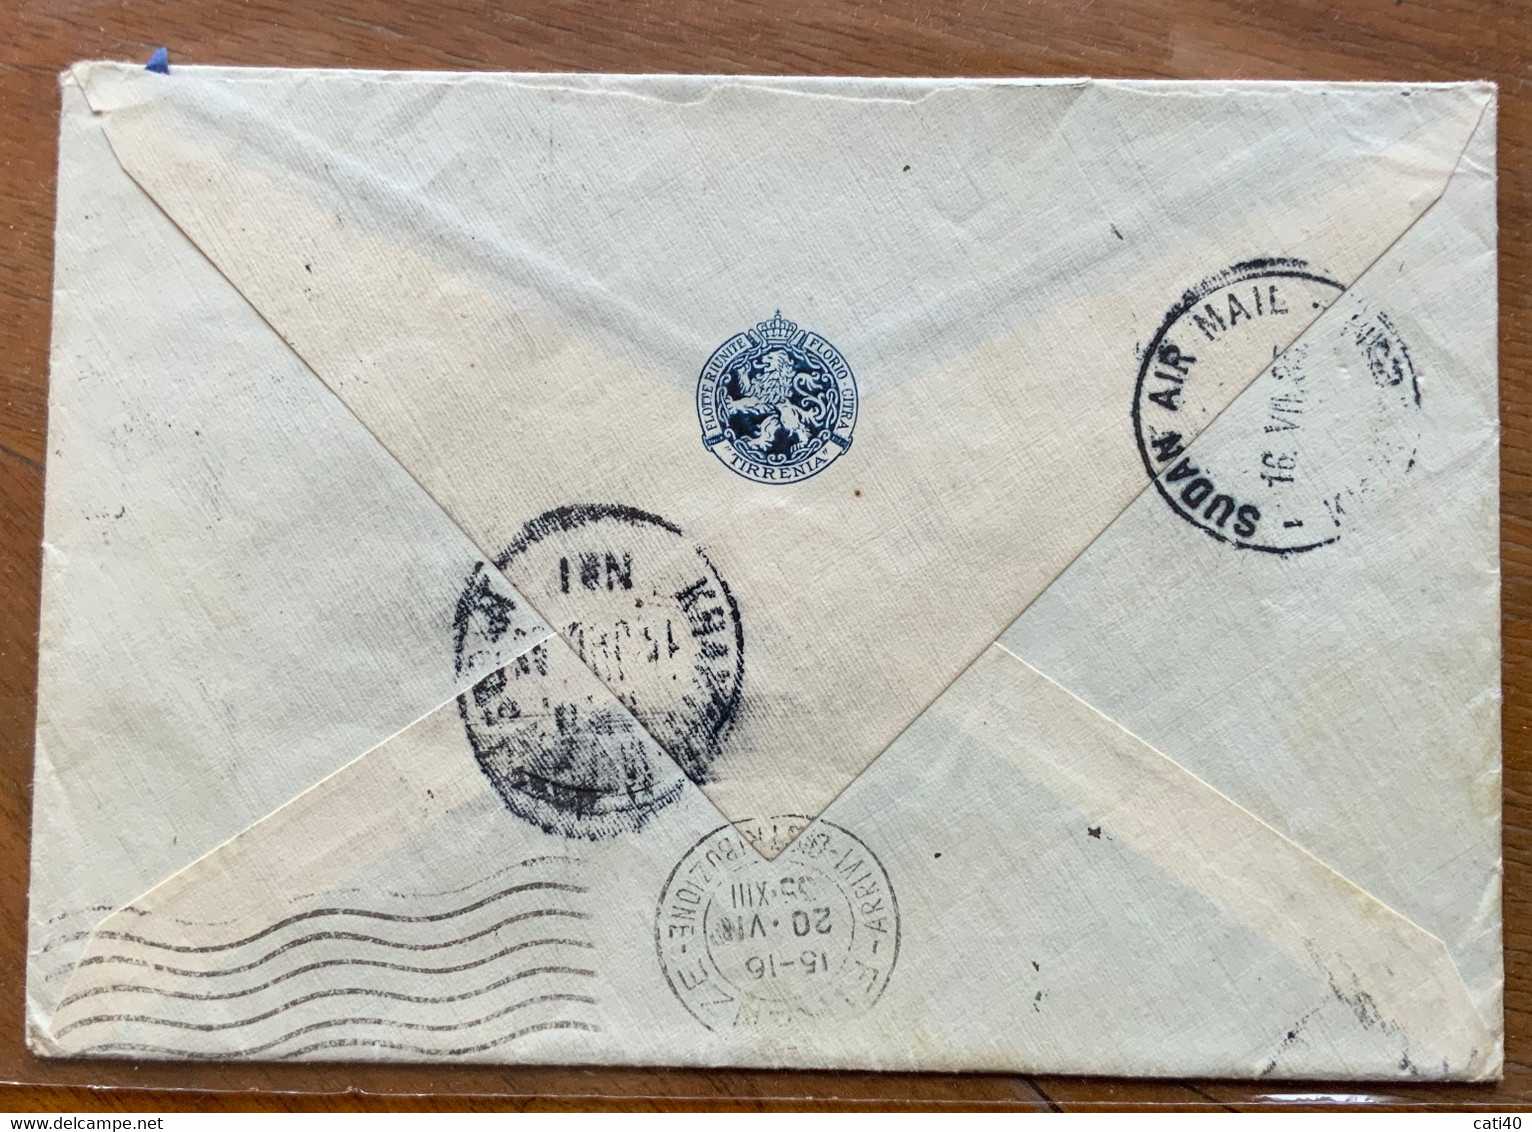 FLOTTE RIUNITE FLORIO - CITRA - TIRRENIA - SUD AN AIR MAIL With 3 PIASTRES/4,5   FROM PORT SAID 13 VII 35  TO FIRENZE - Sudan Del Sud